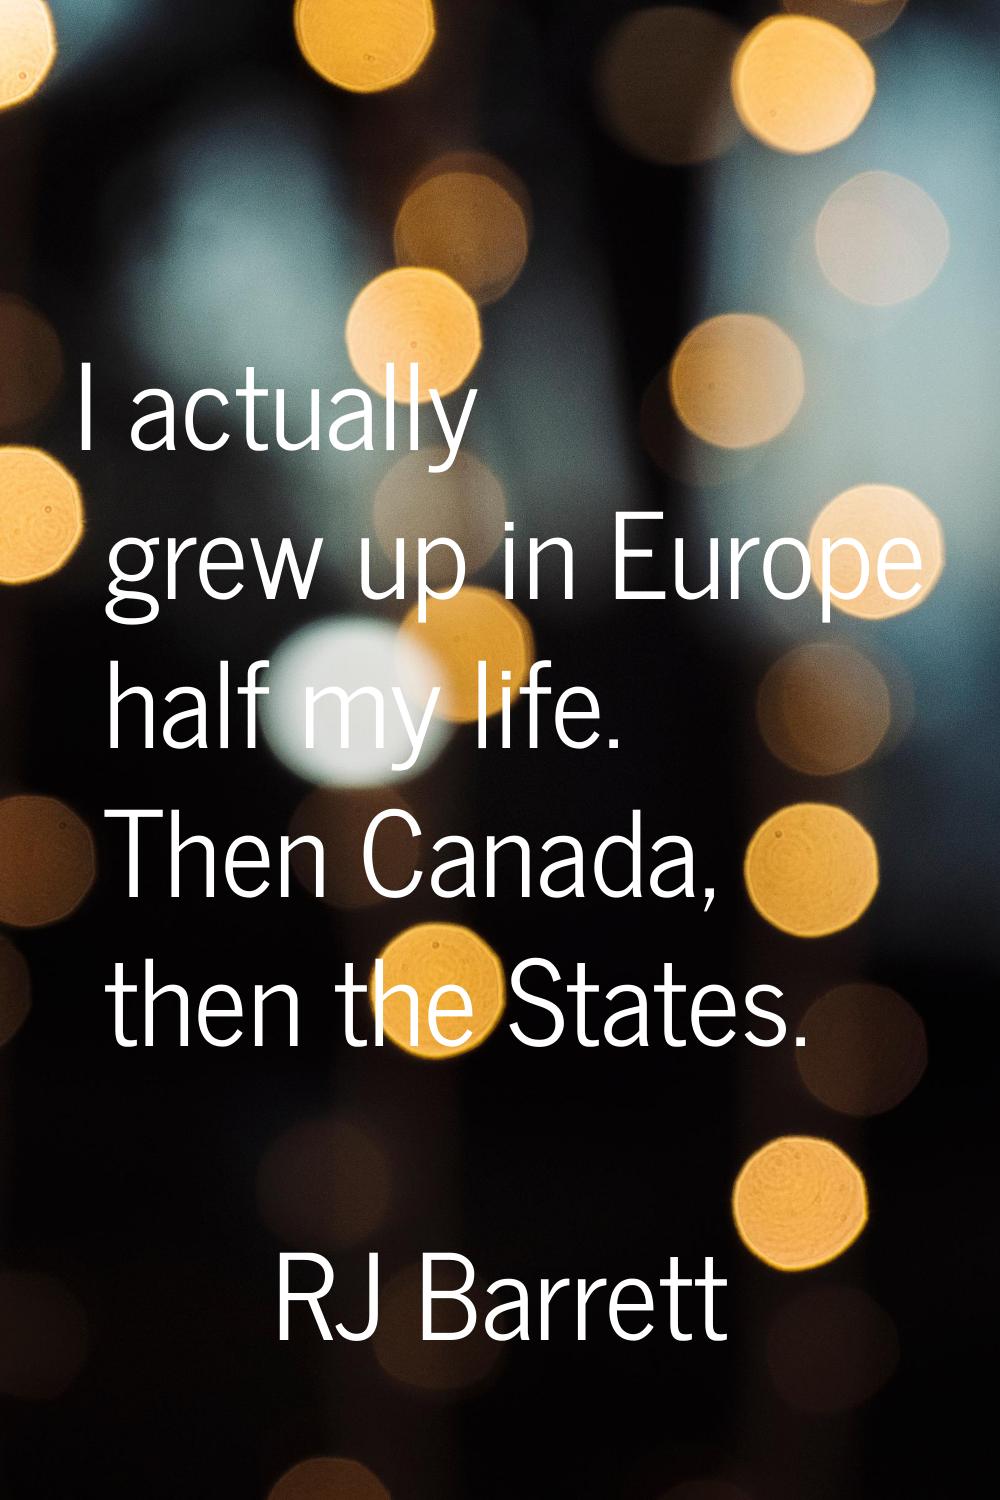 I actually grew up in Europe half my life. Then Canada, then the States.